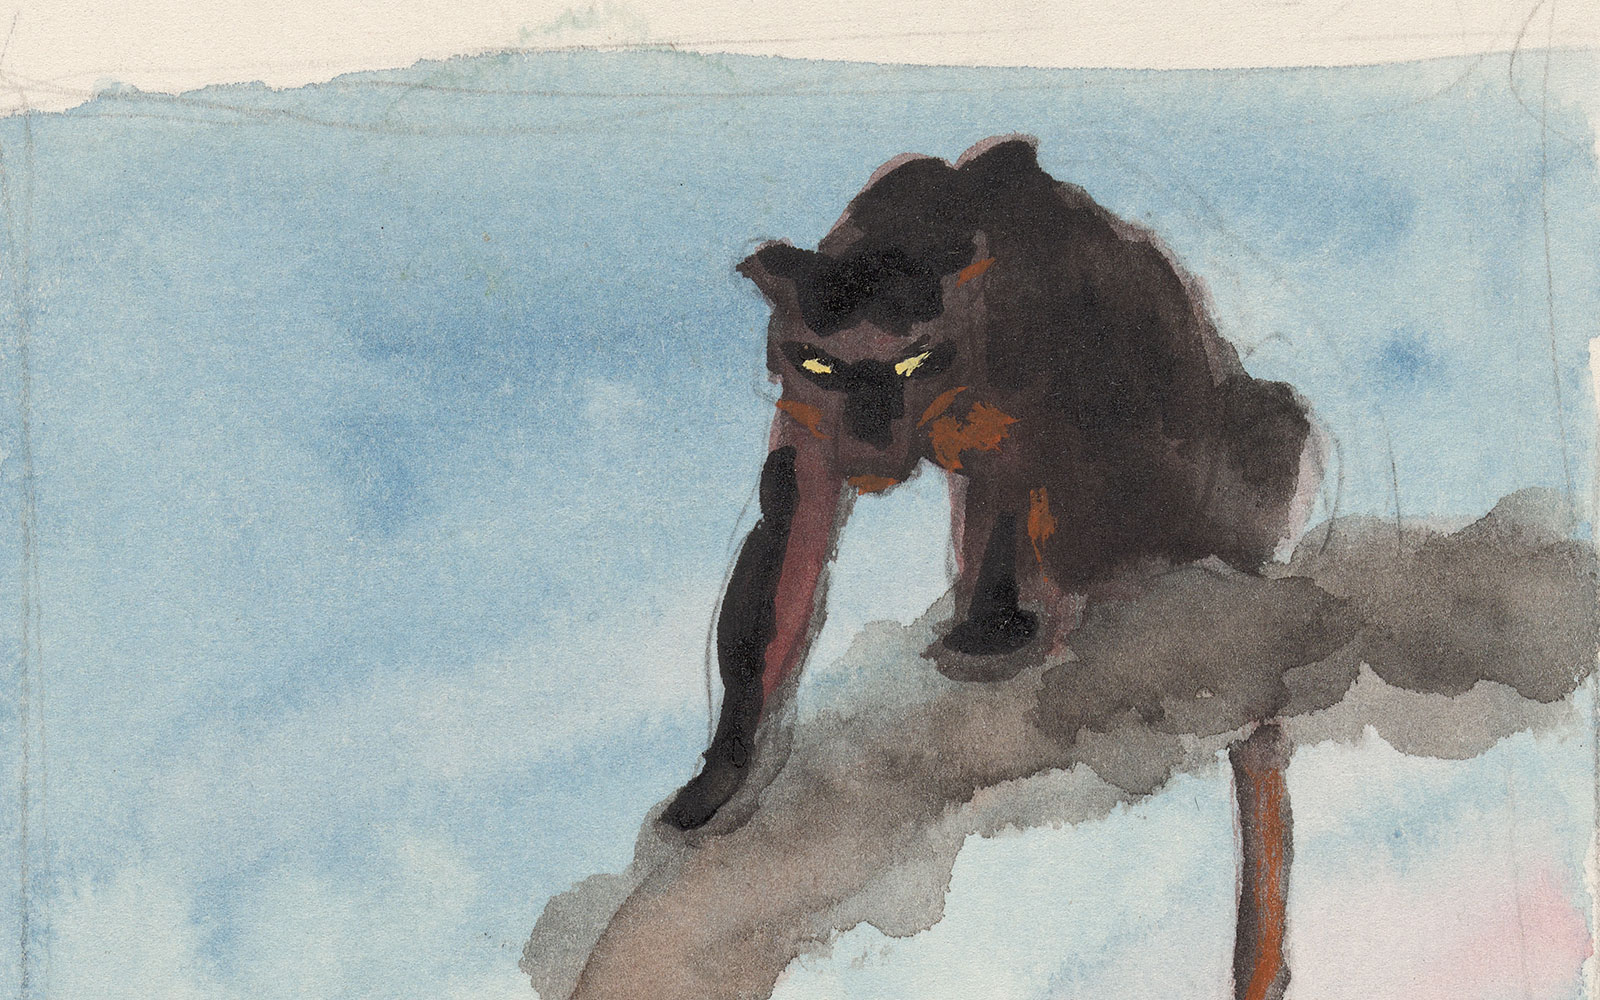 Detail of watercolor showing a black panther sitting on a cloud of gray smoke with a blue sky in the background.